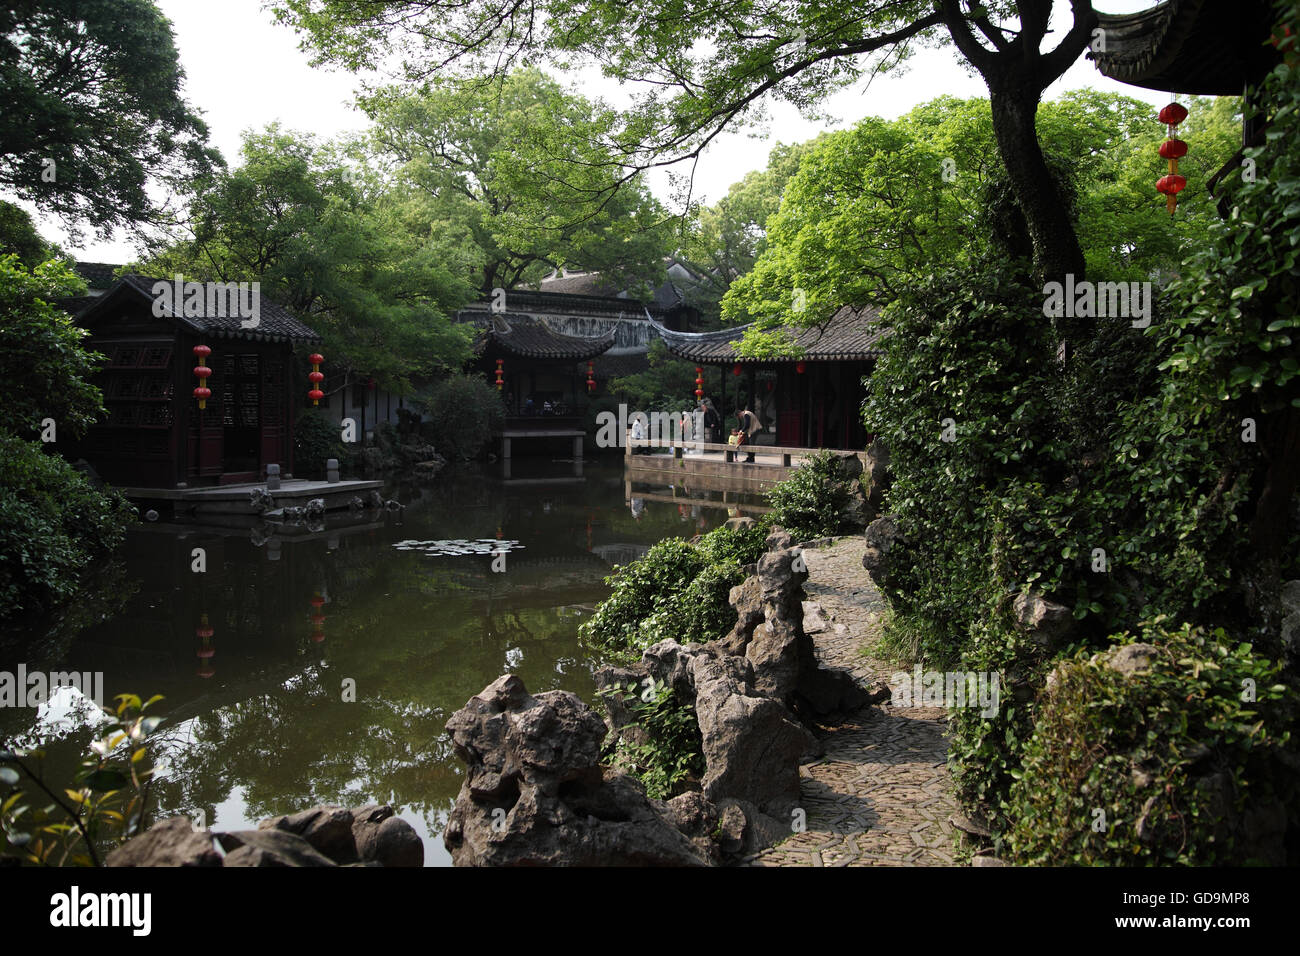 Houses, a pond, vegetation and Chinese lanterns in the Tuisi Garden, a typical old Chinese garden built in 1885. Tongli, China. Stock Photo